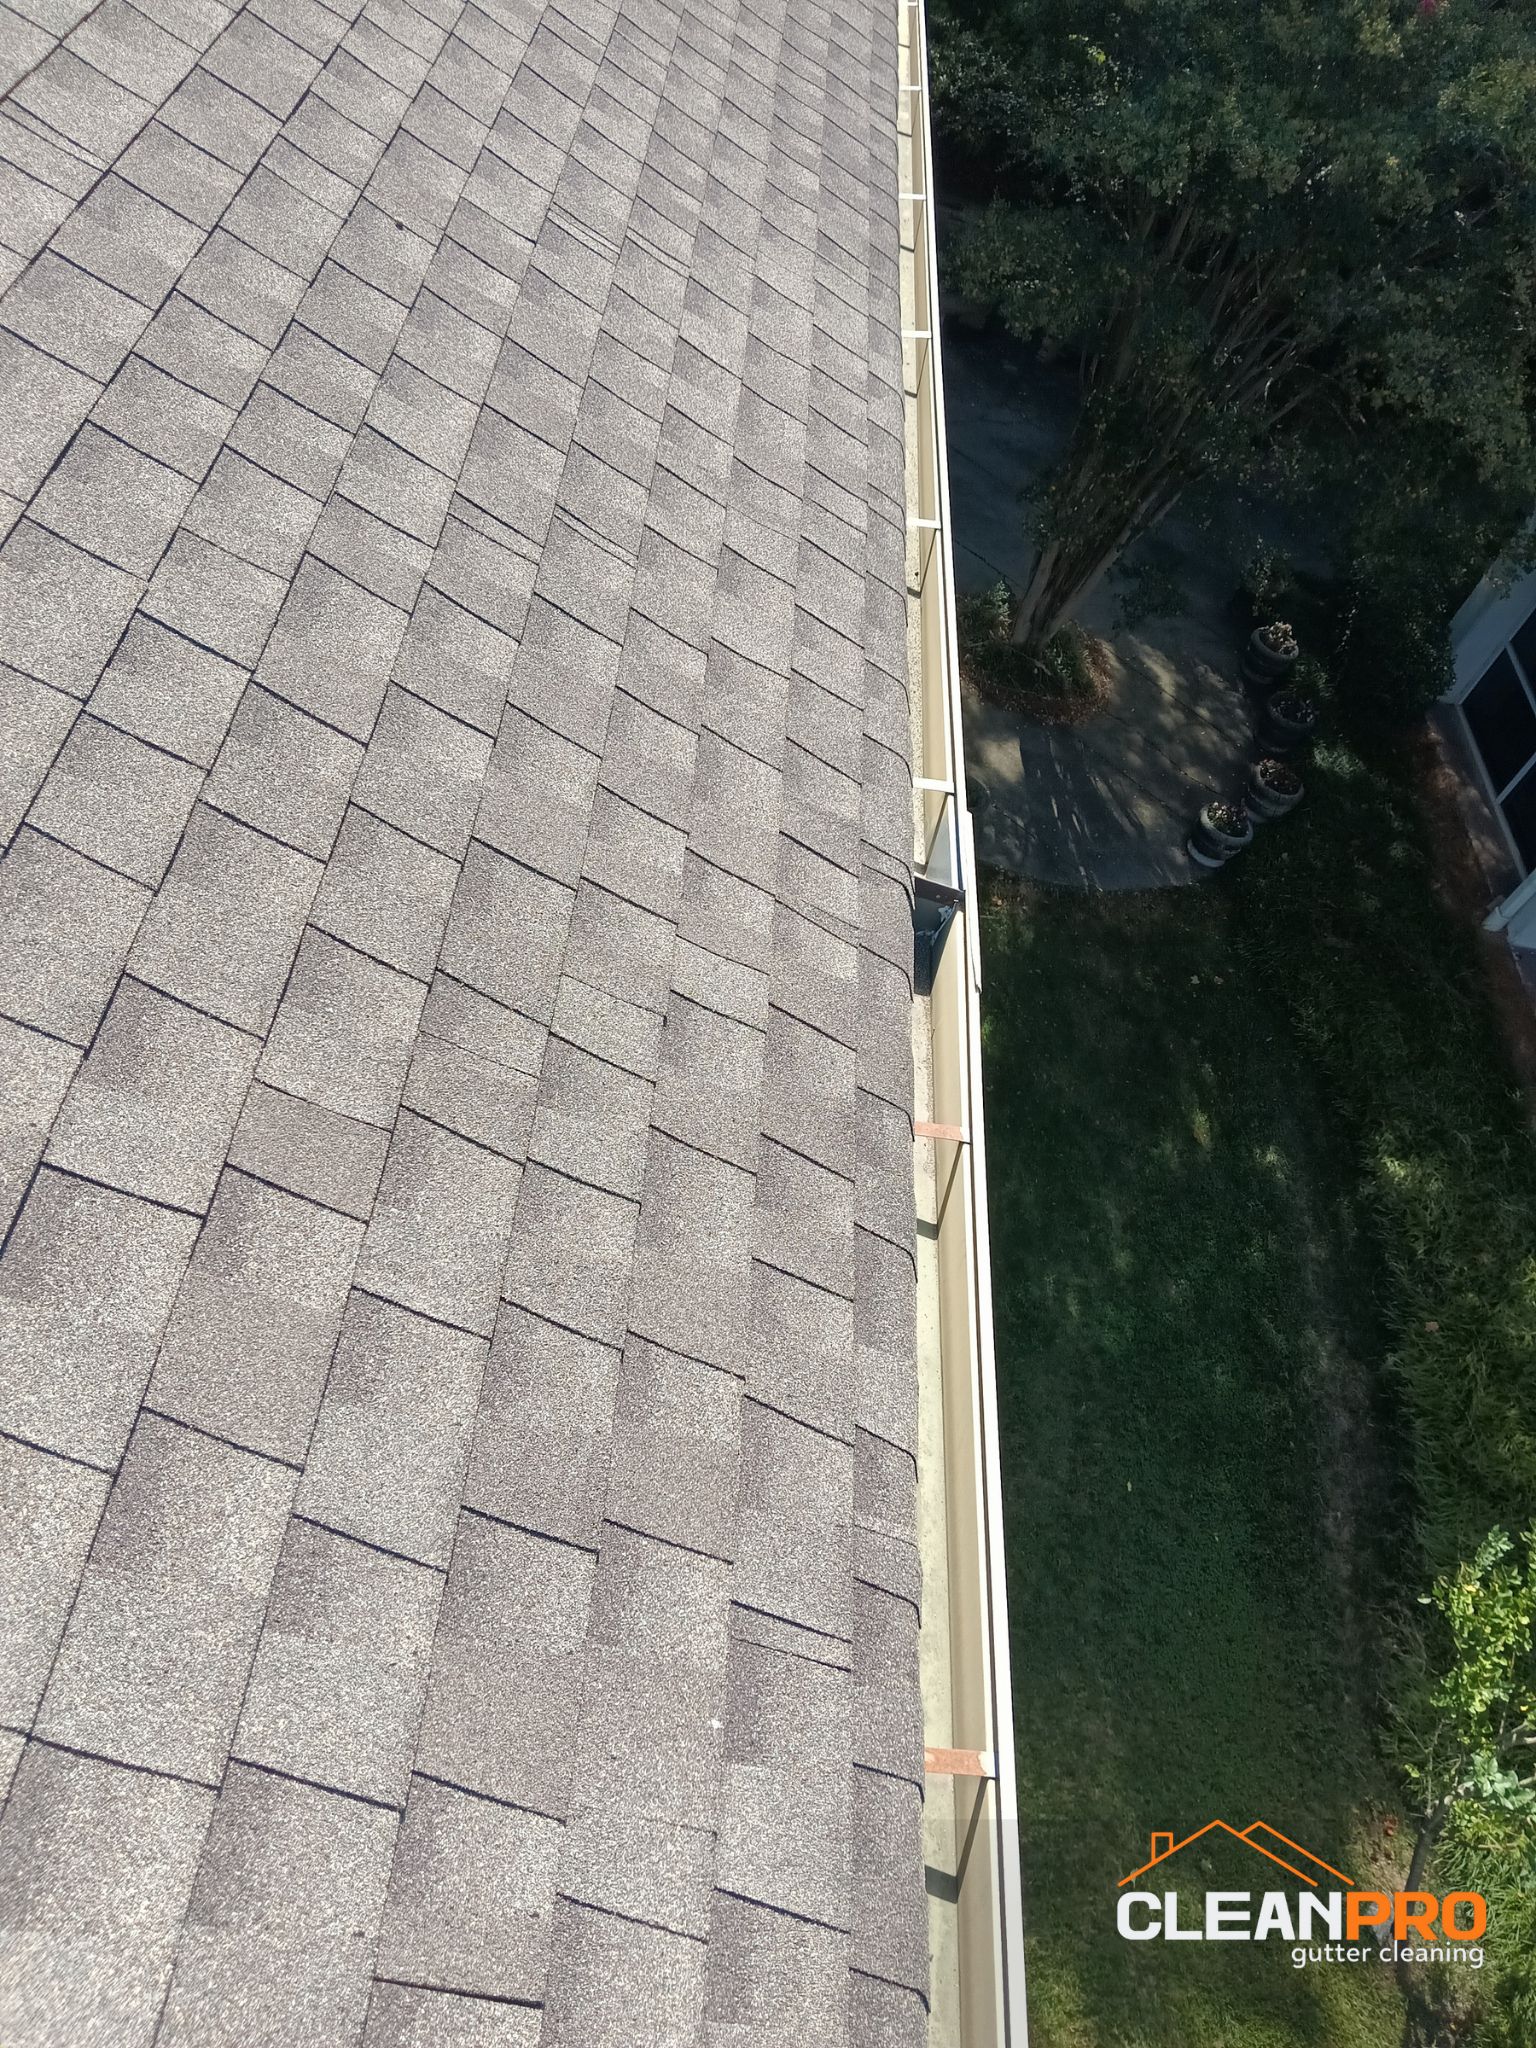 Quality Gutter Cleaning in Dayton OH